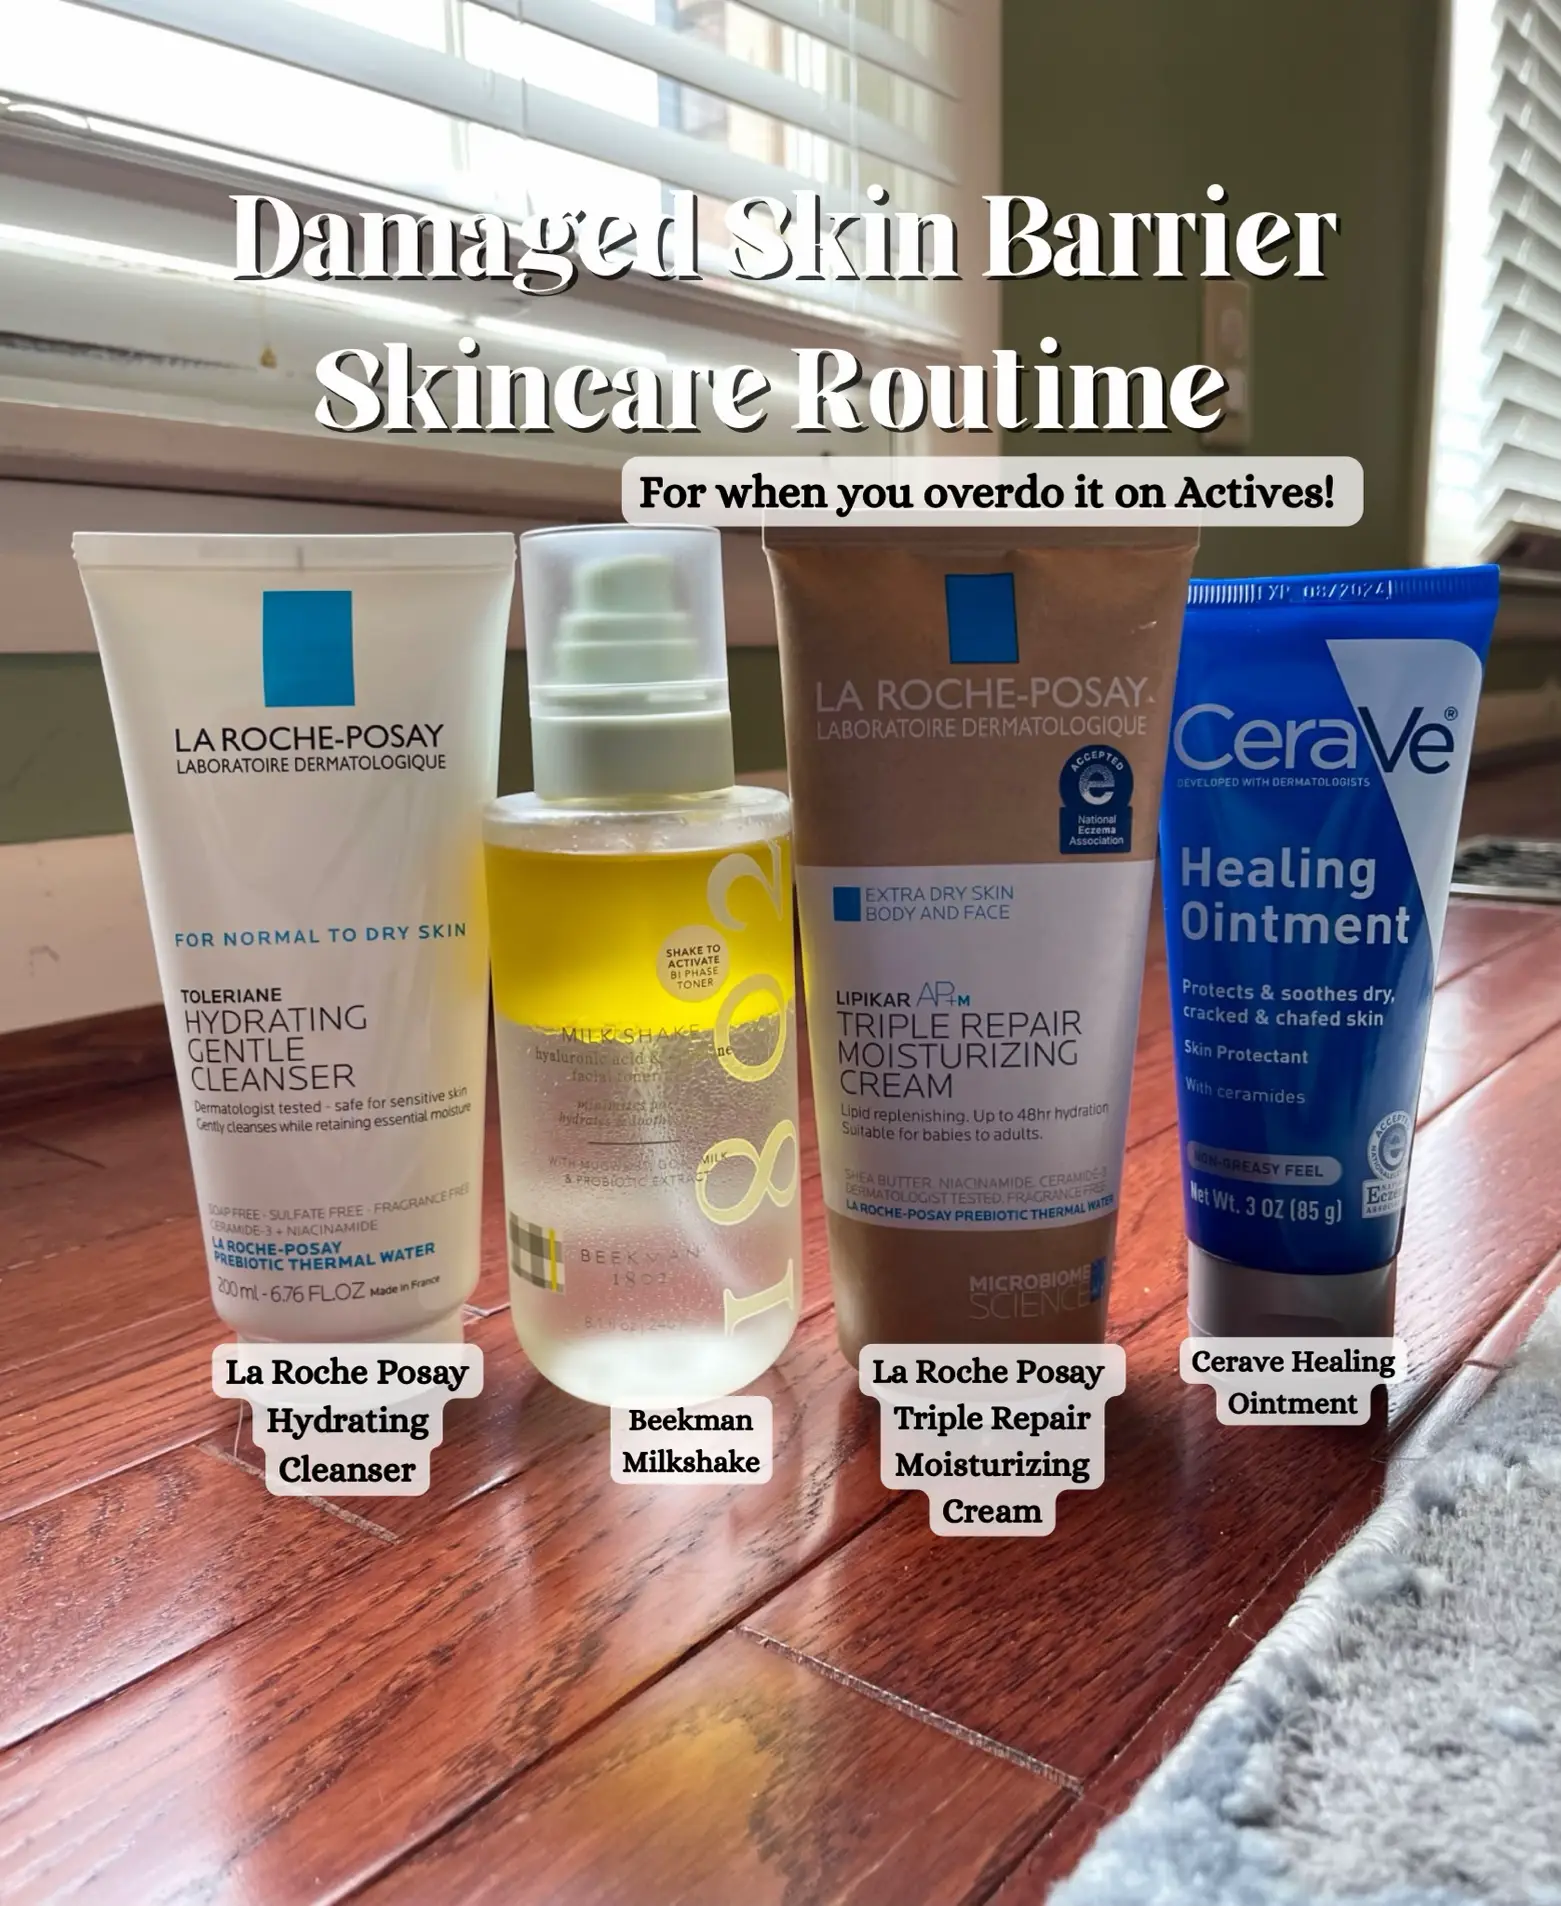 Damaged Skin Barrier Skincare Routine's images